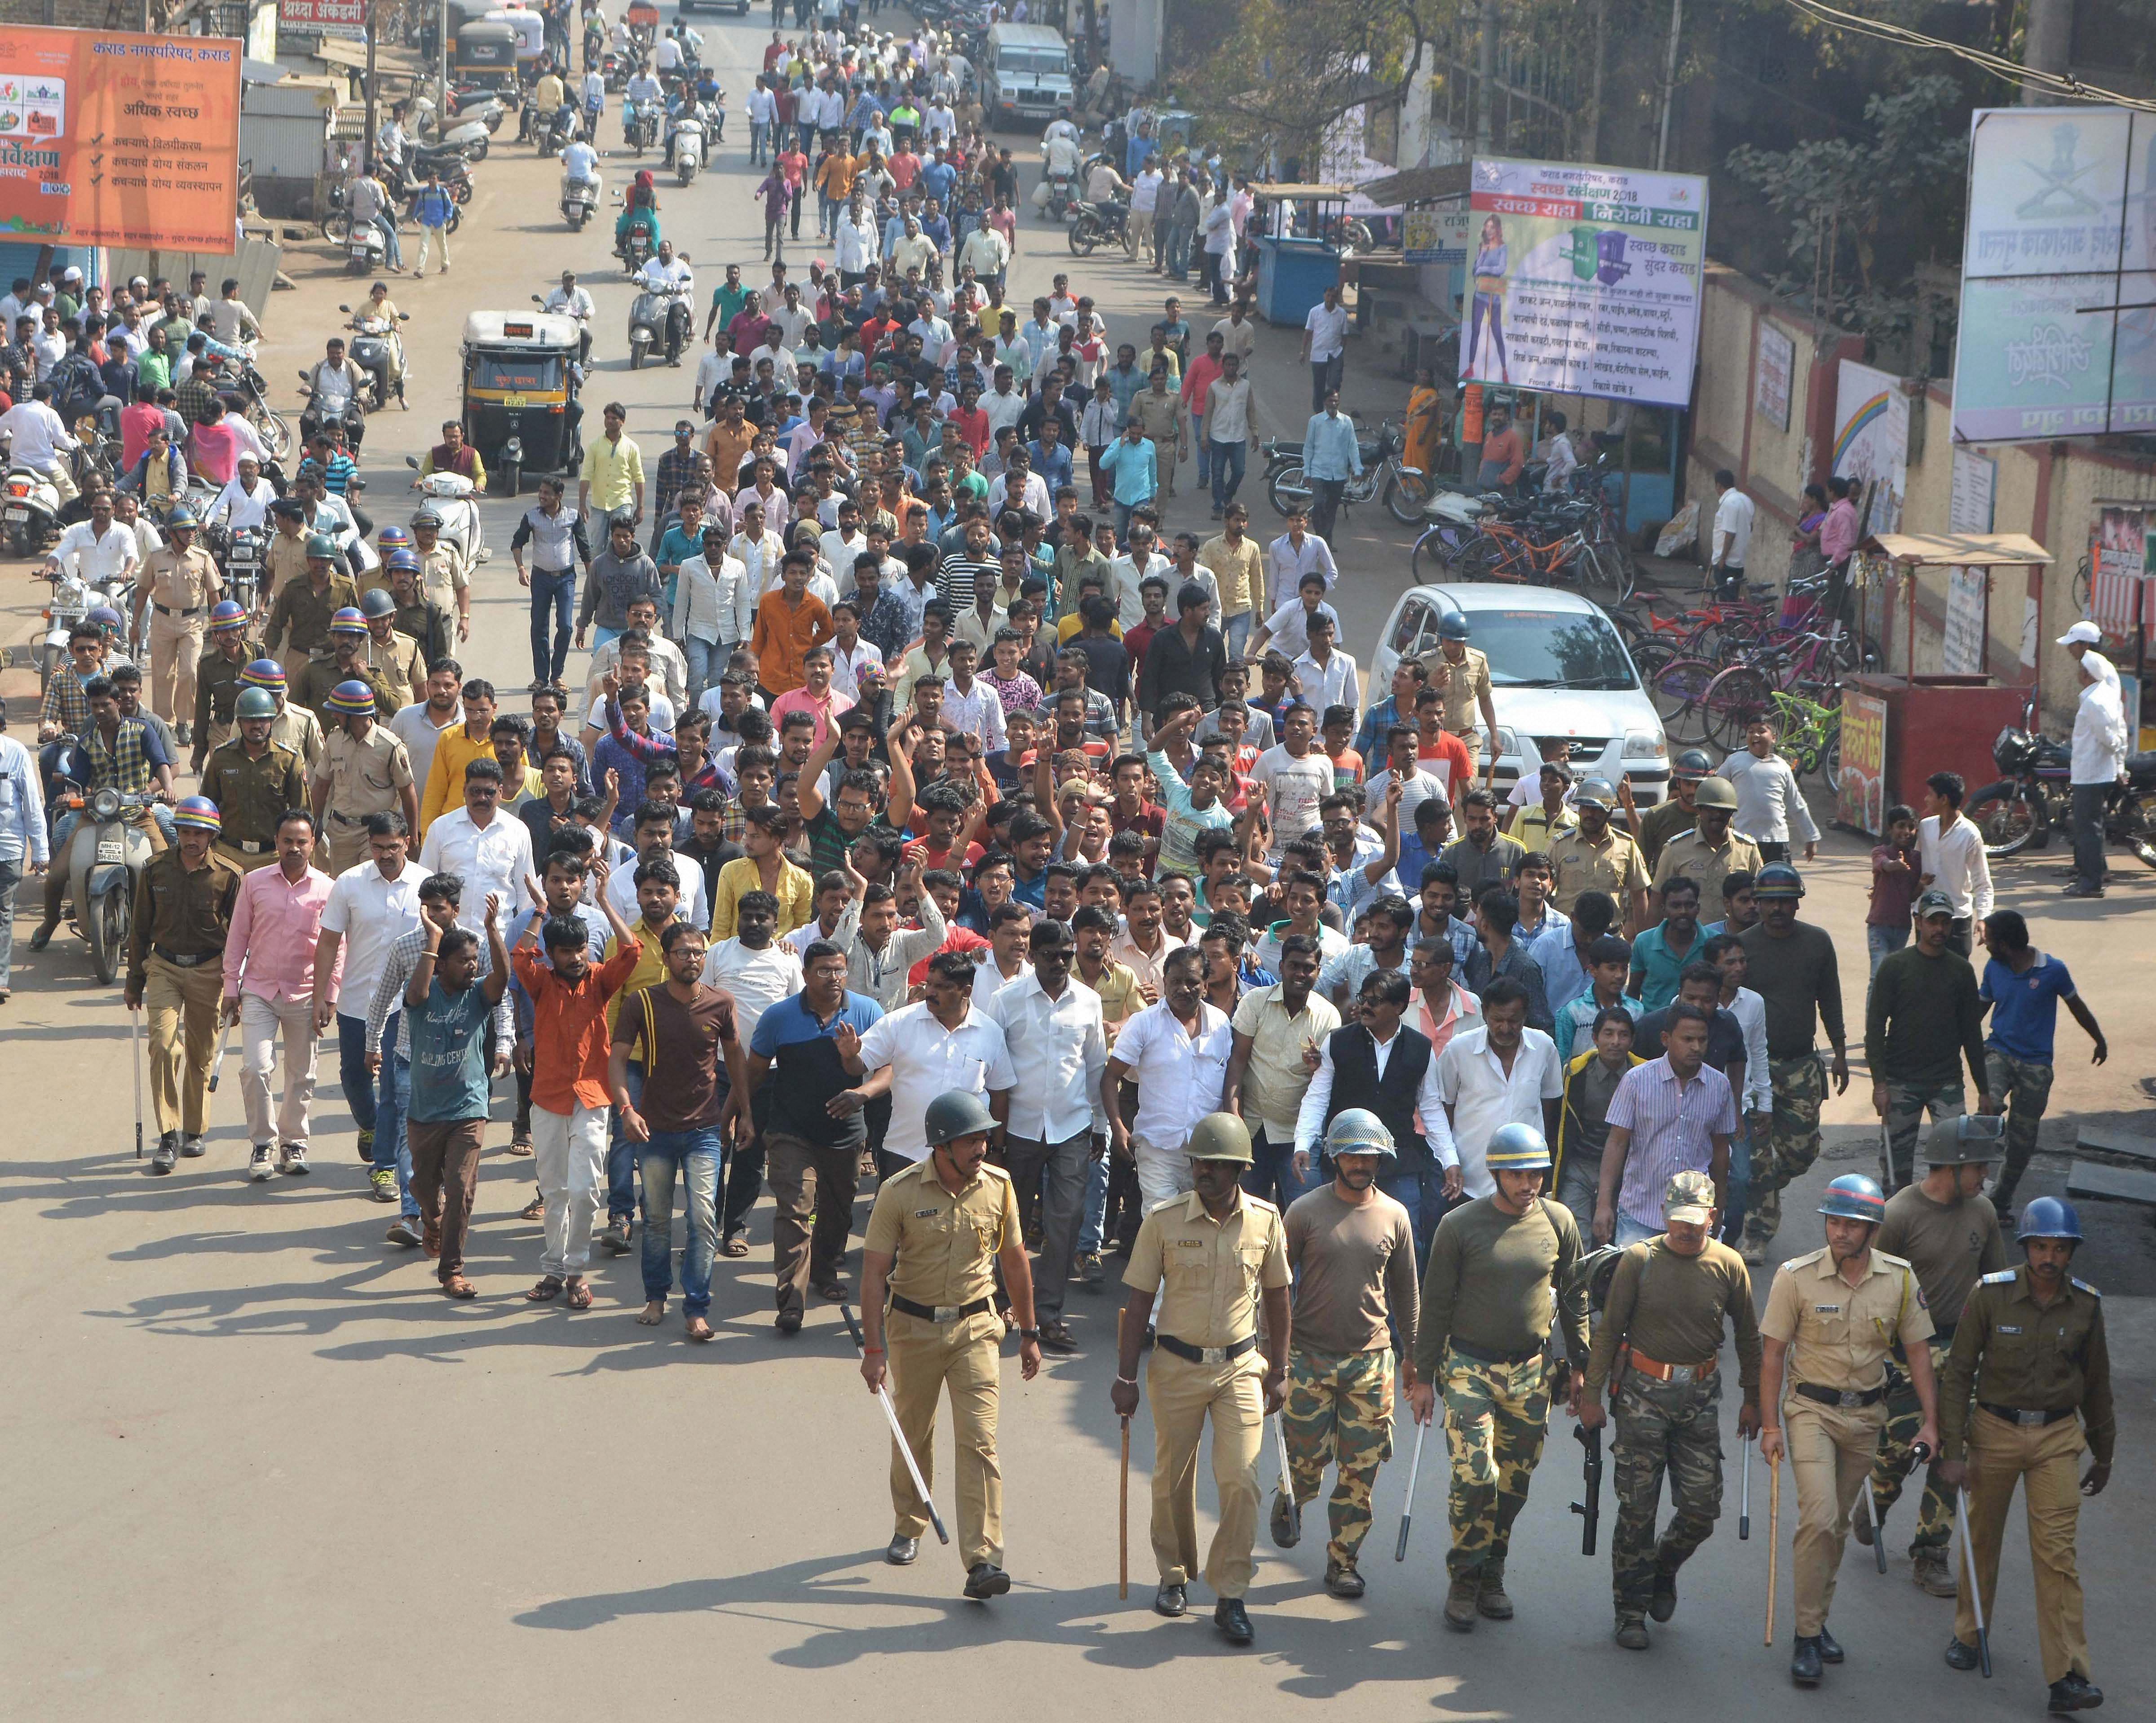 Dalits take part in a protest rally during their Maharashtra Bandh called over the Bhima Koregaon violence, in Karad. (PTI Photo)